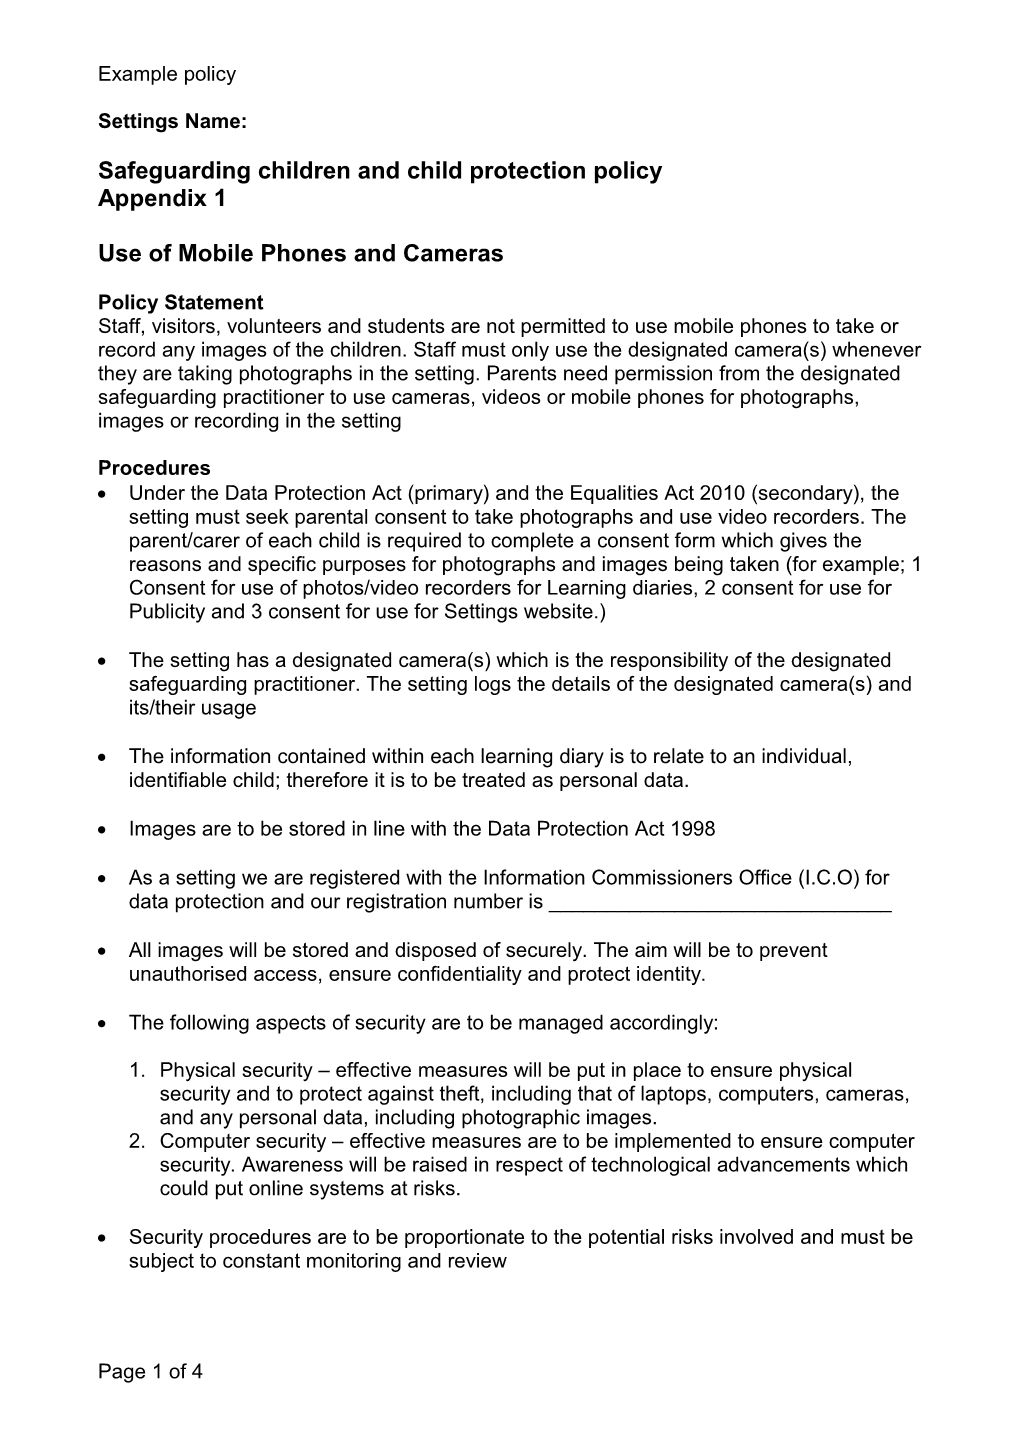 Use of Mobile Phones and Cameras